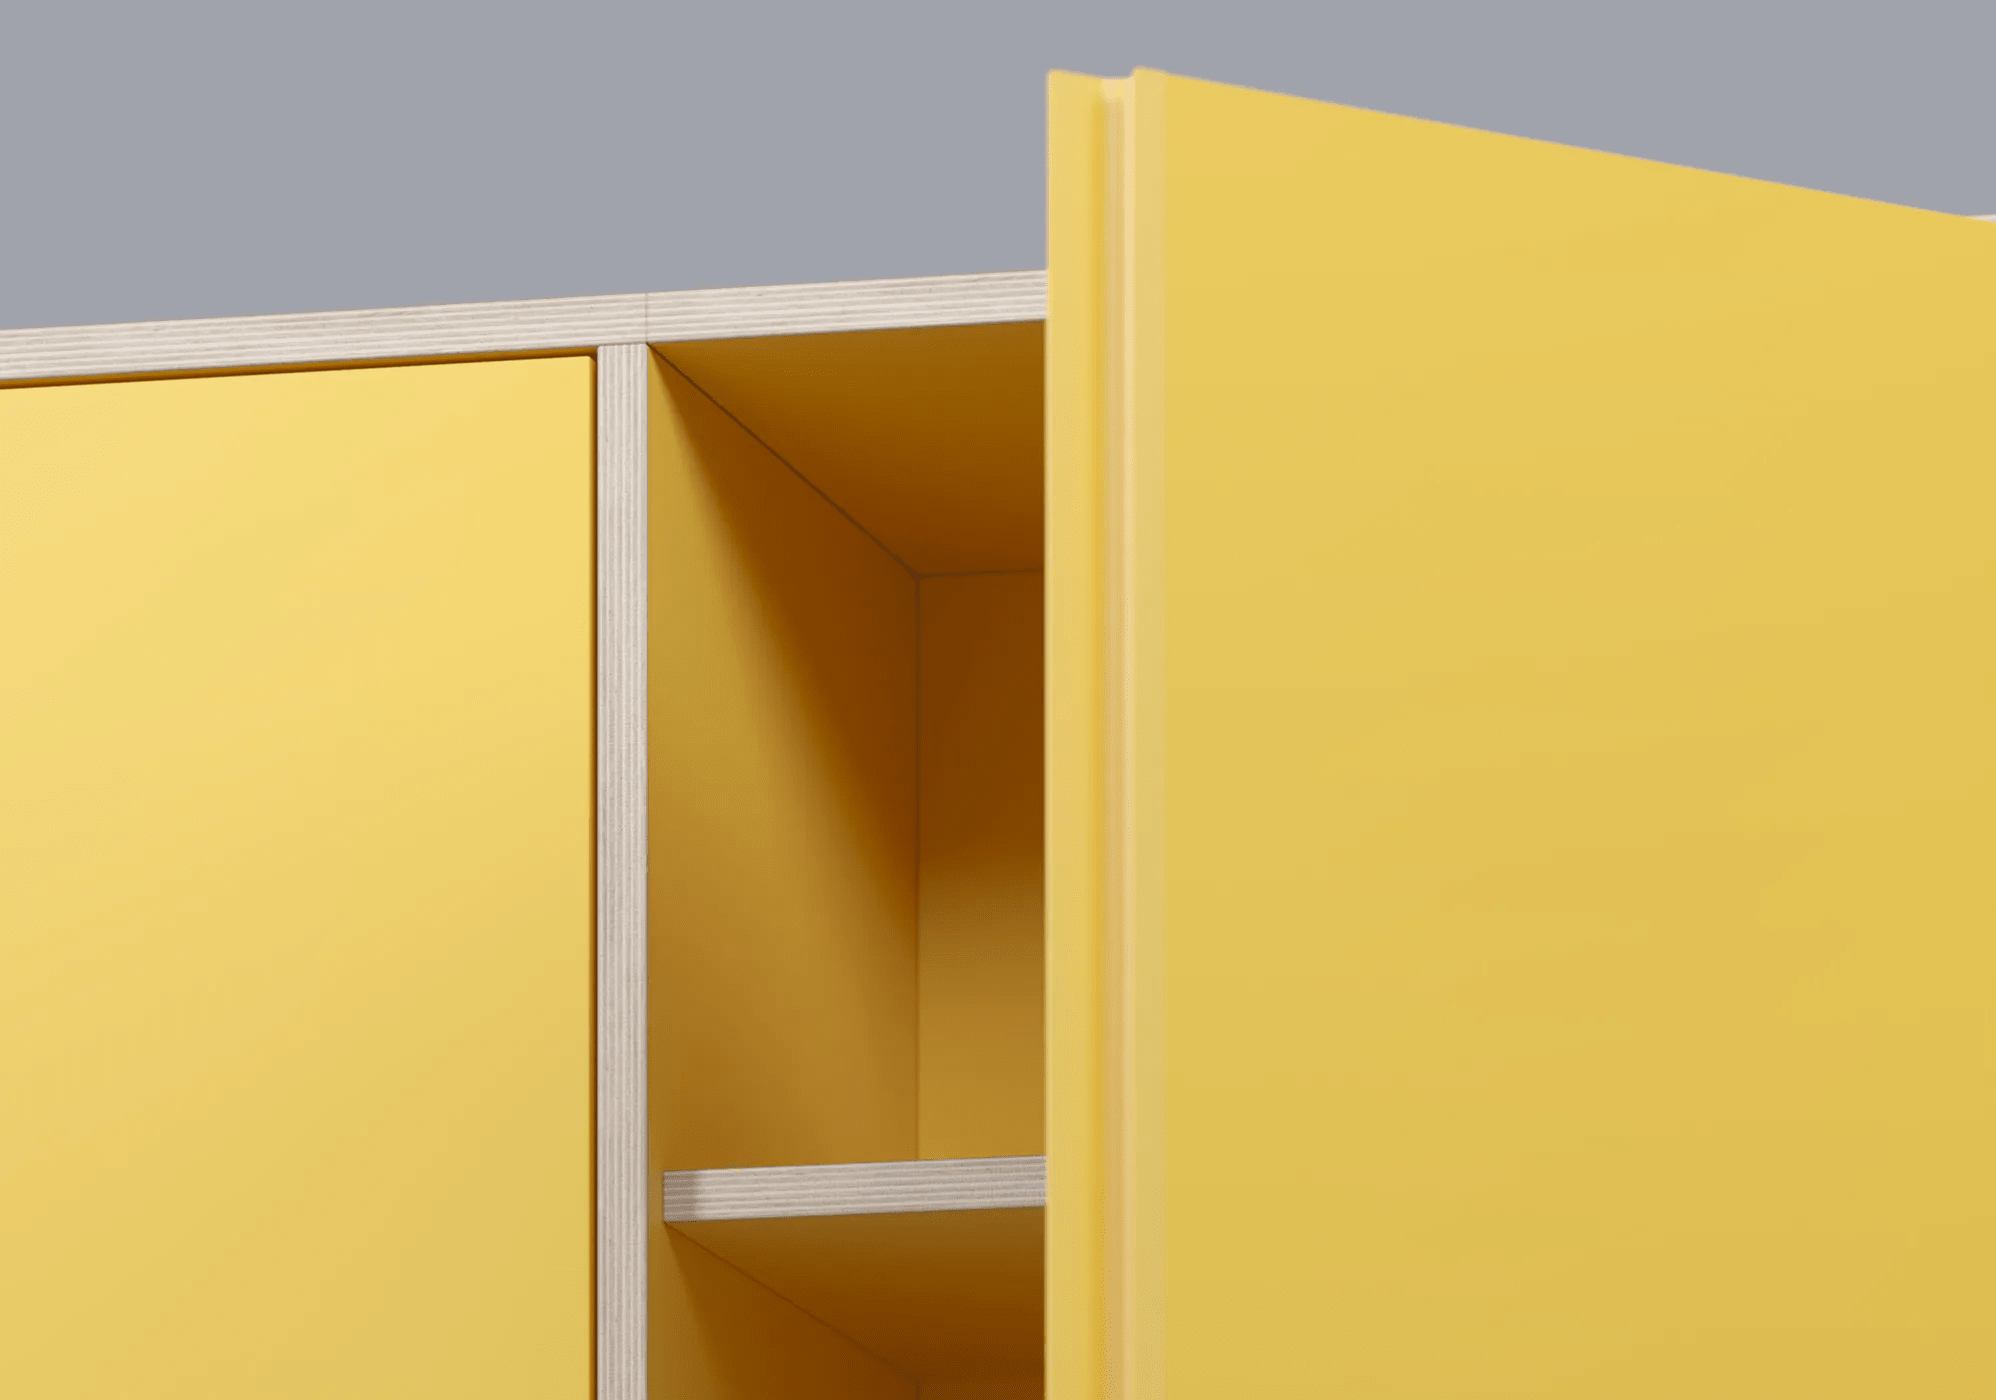 Vinyl Storage in Yellow with Doors and Drawers 6